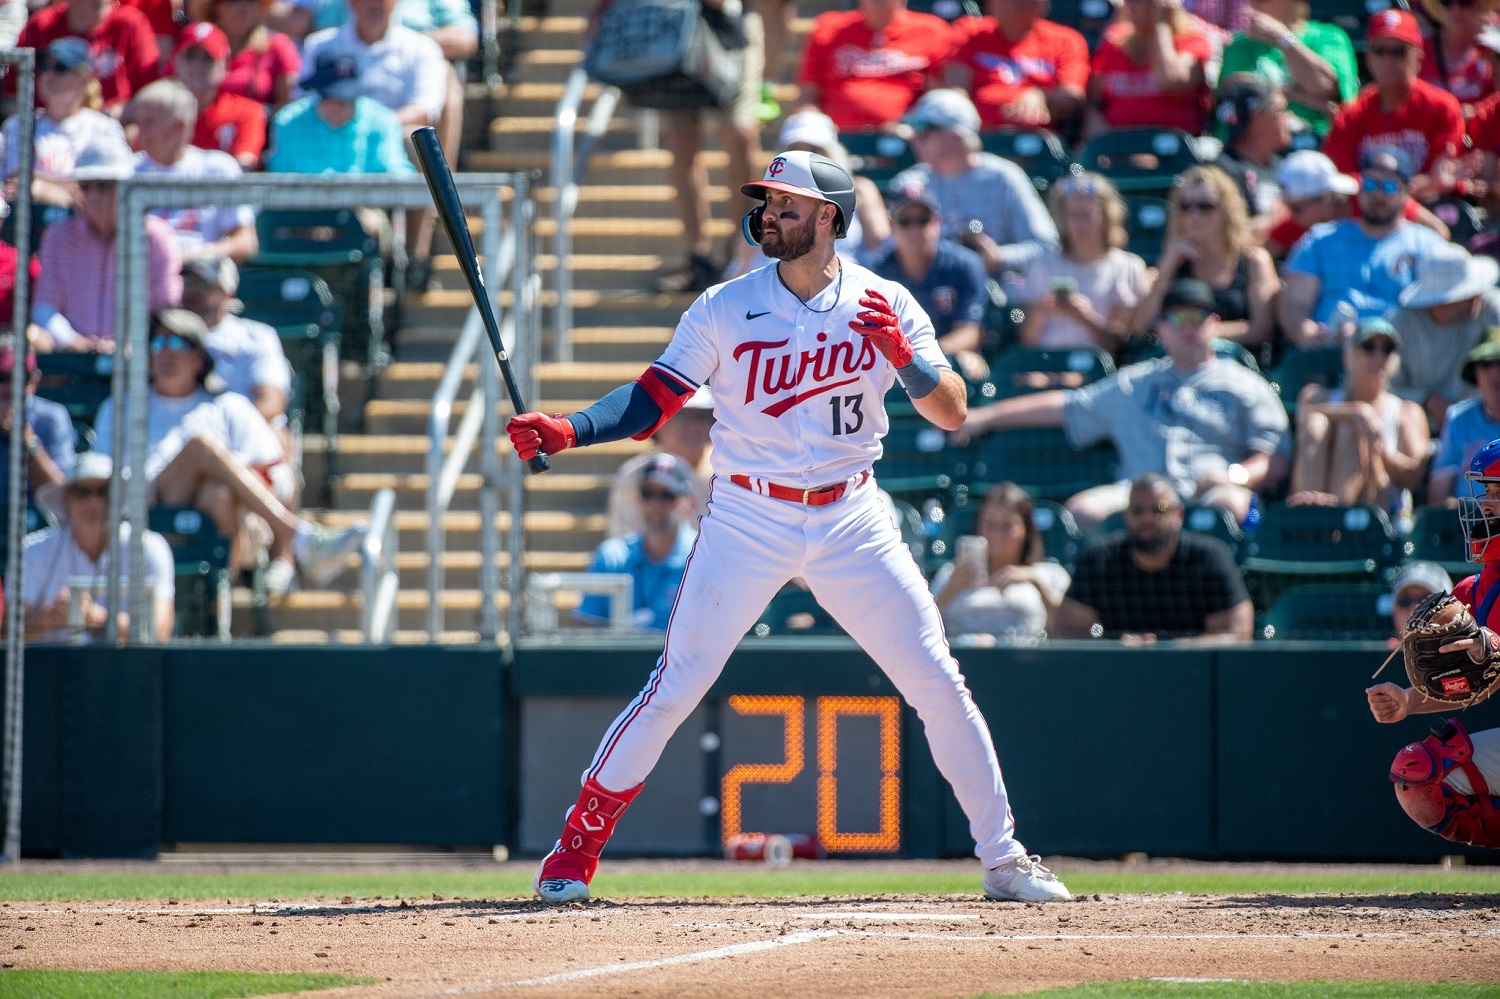 Minnesota Twins need to gas Joey Gallo from roster 